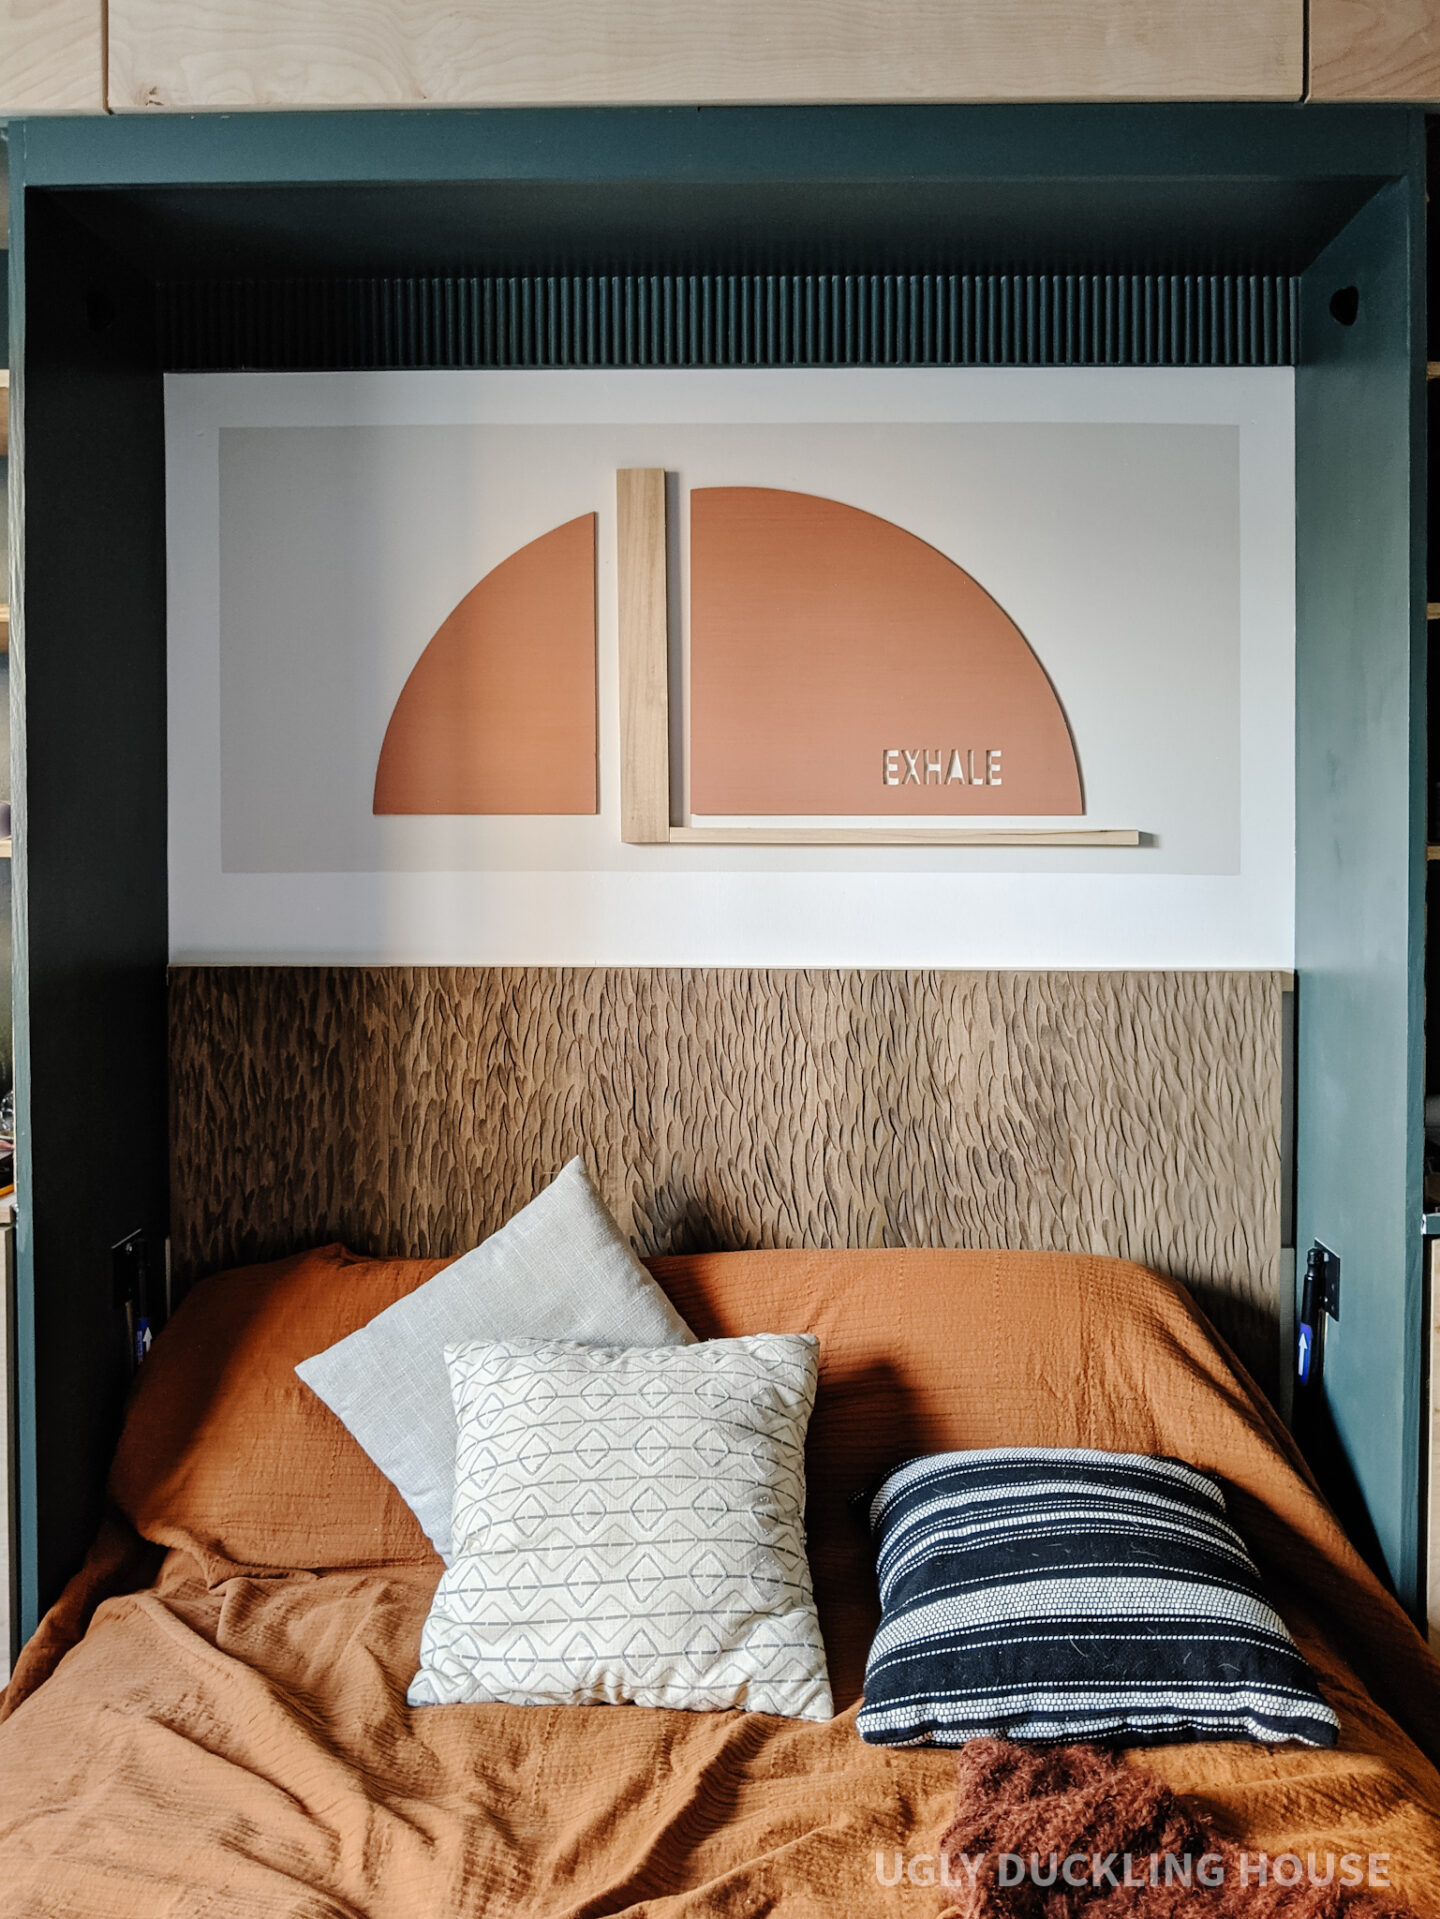 murphy bed nook reveal - exhale rust arch color block art and carved wood headboard with neutral bedding and rust coverlet